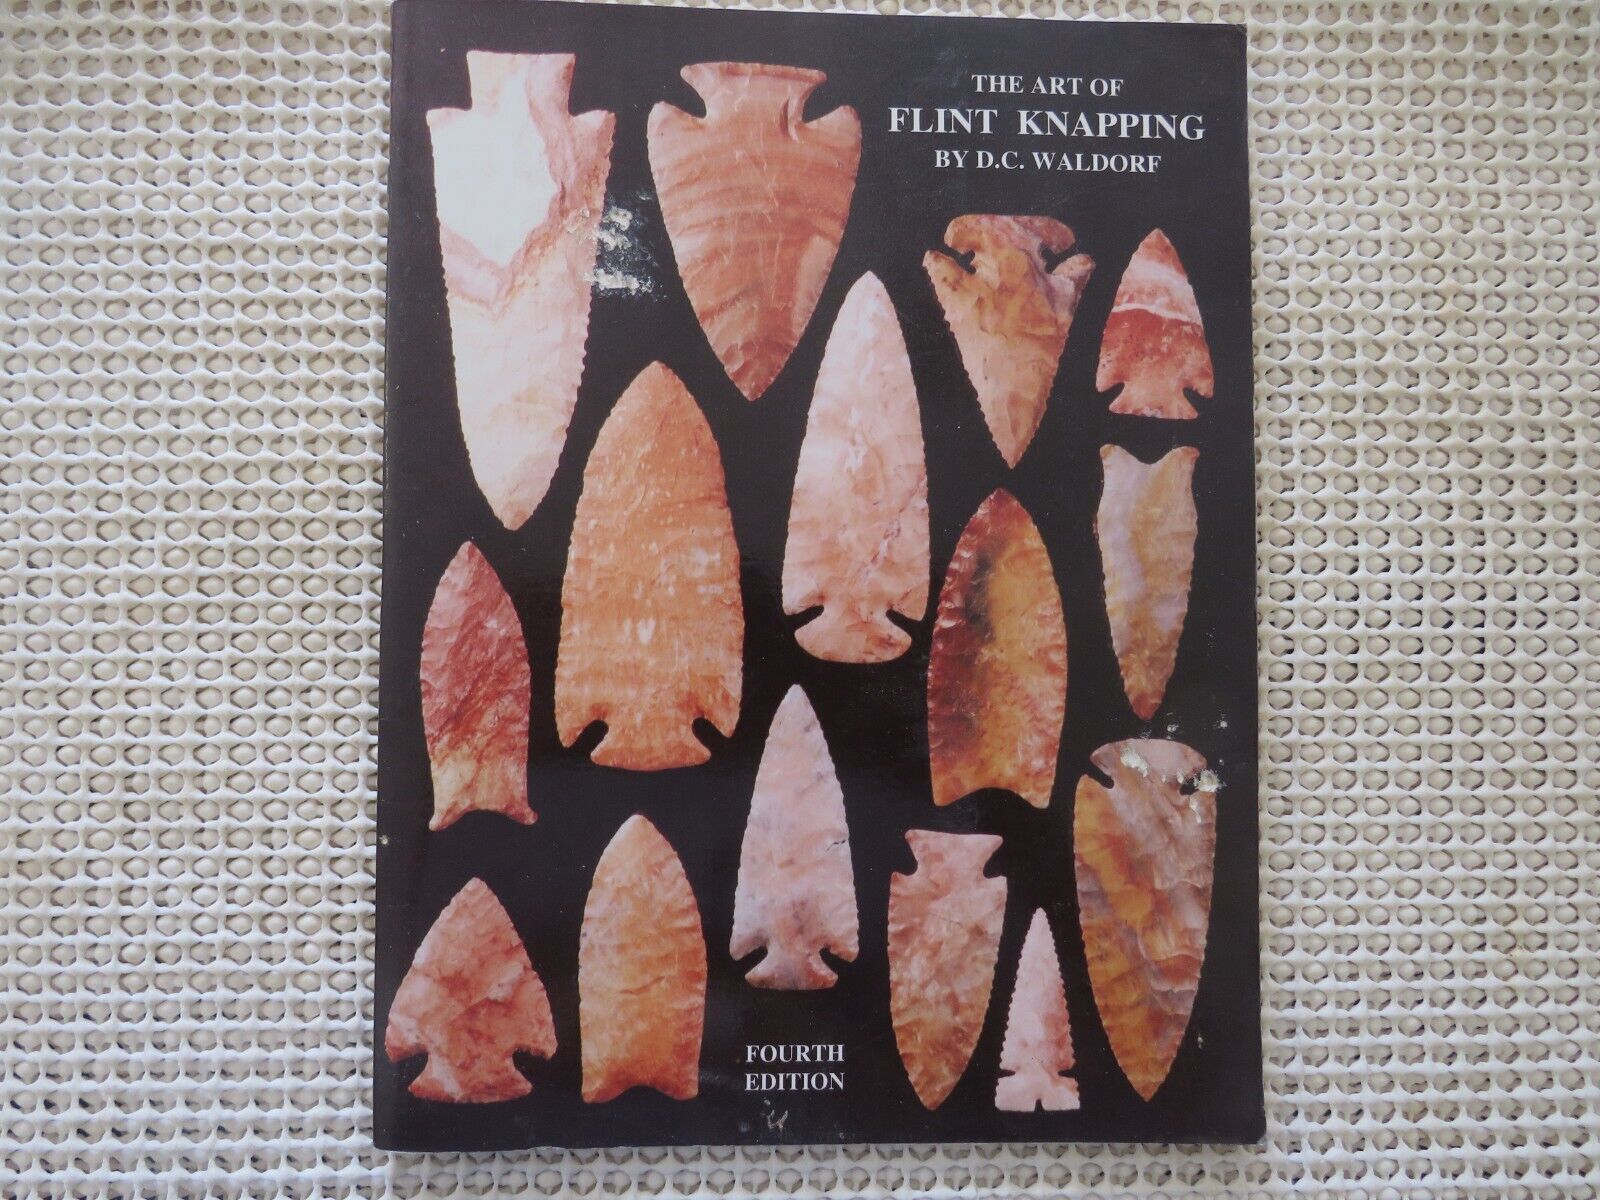 The Art Of Flint Knapping by D. C. Waldorf revised edition 1993